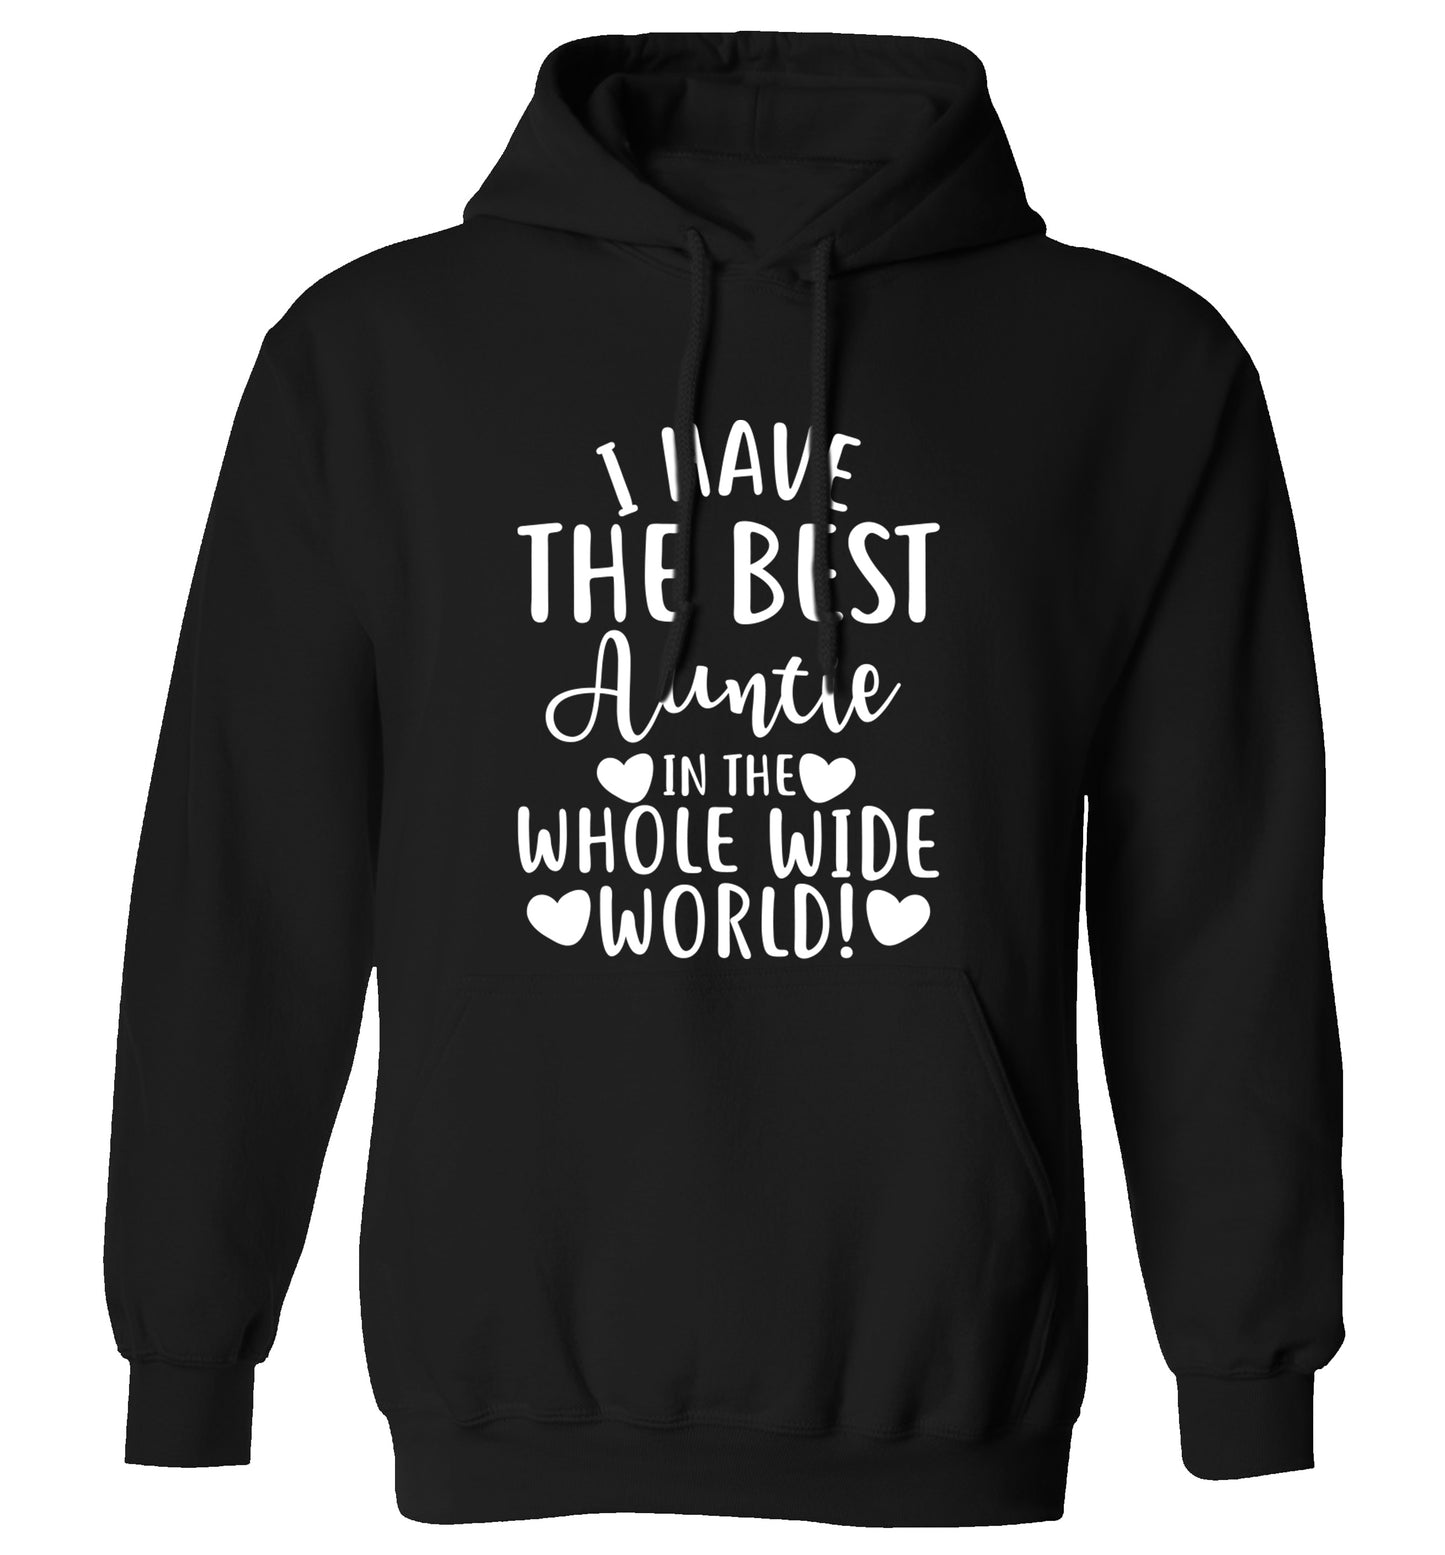 I have the best auntie in the whole wide world! adults unisex black hoodie 2XL